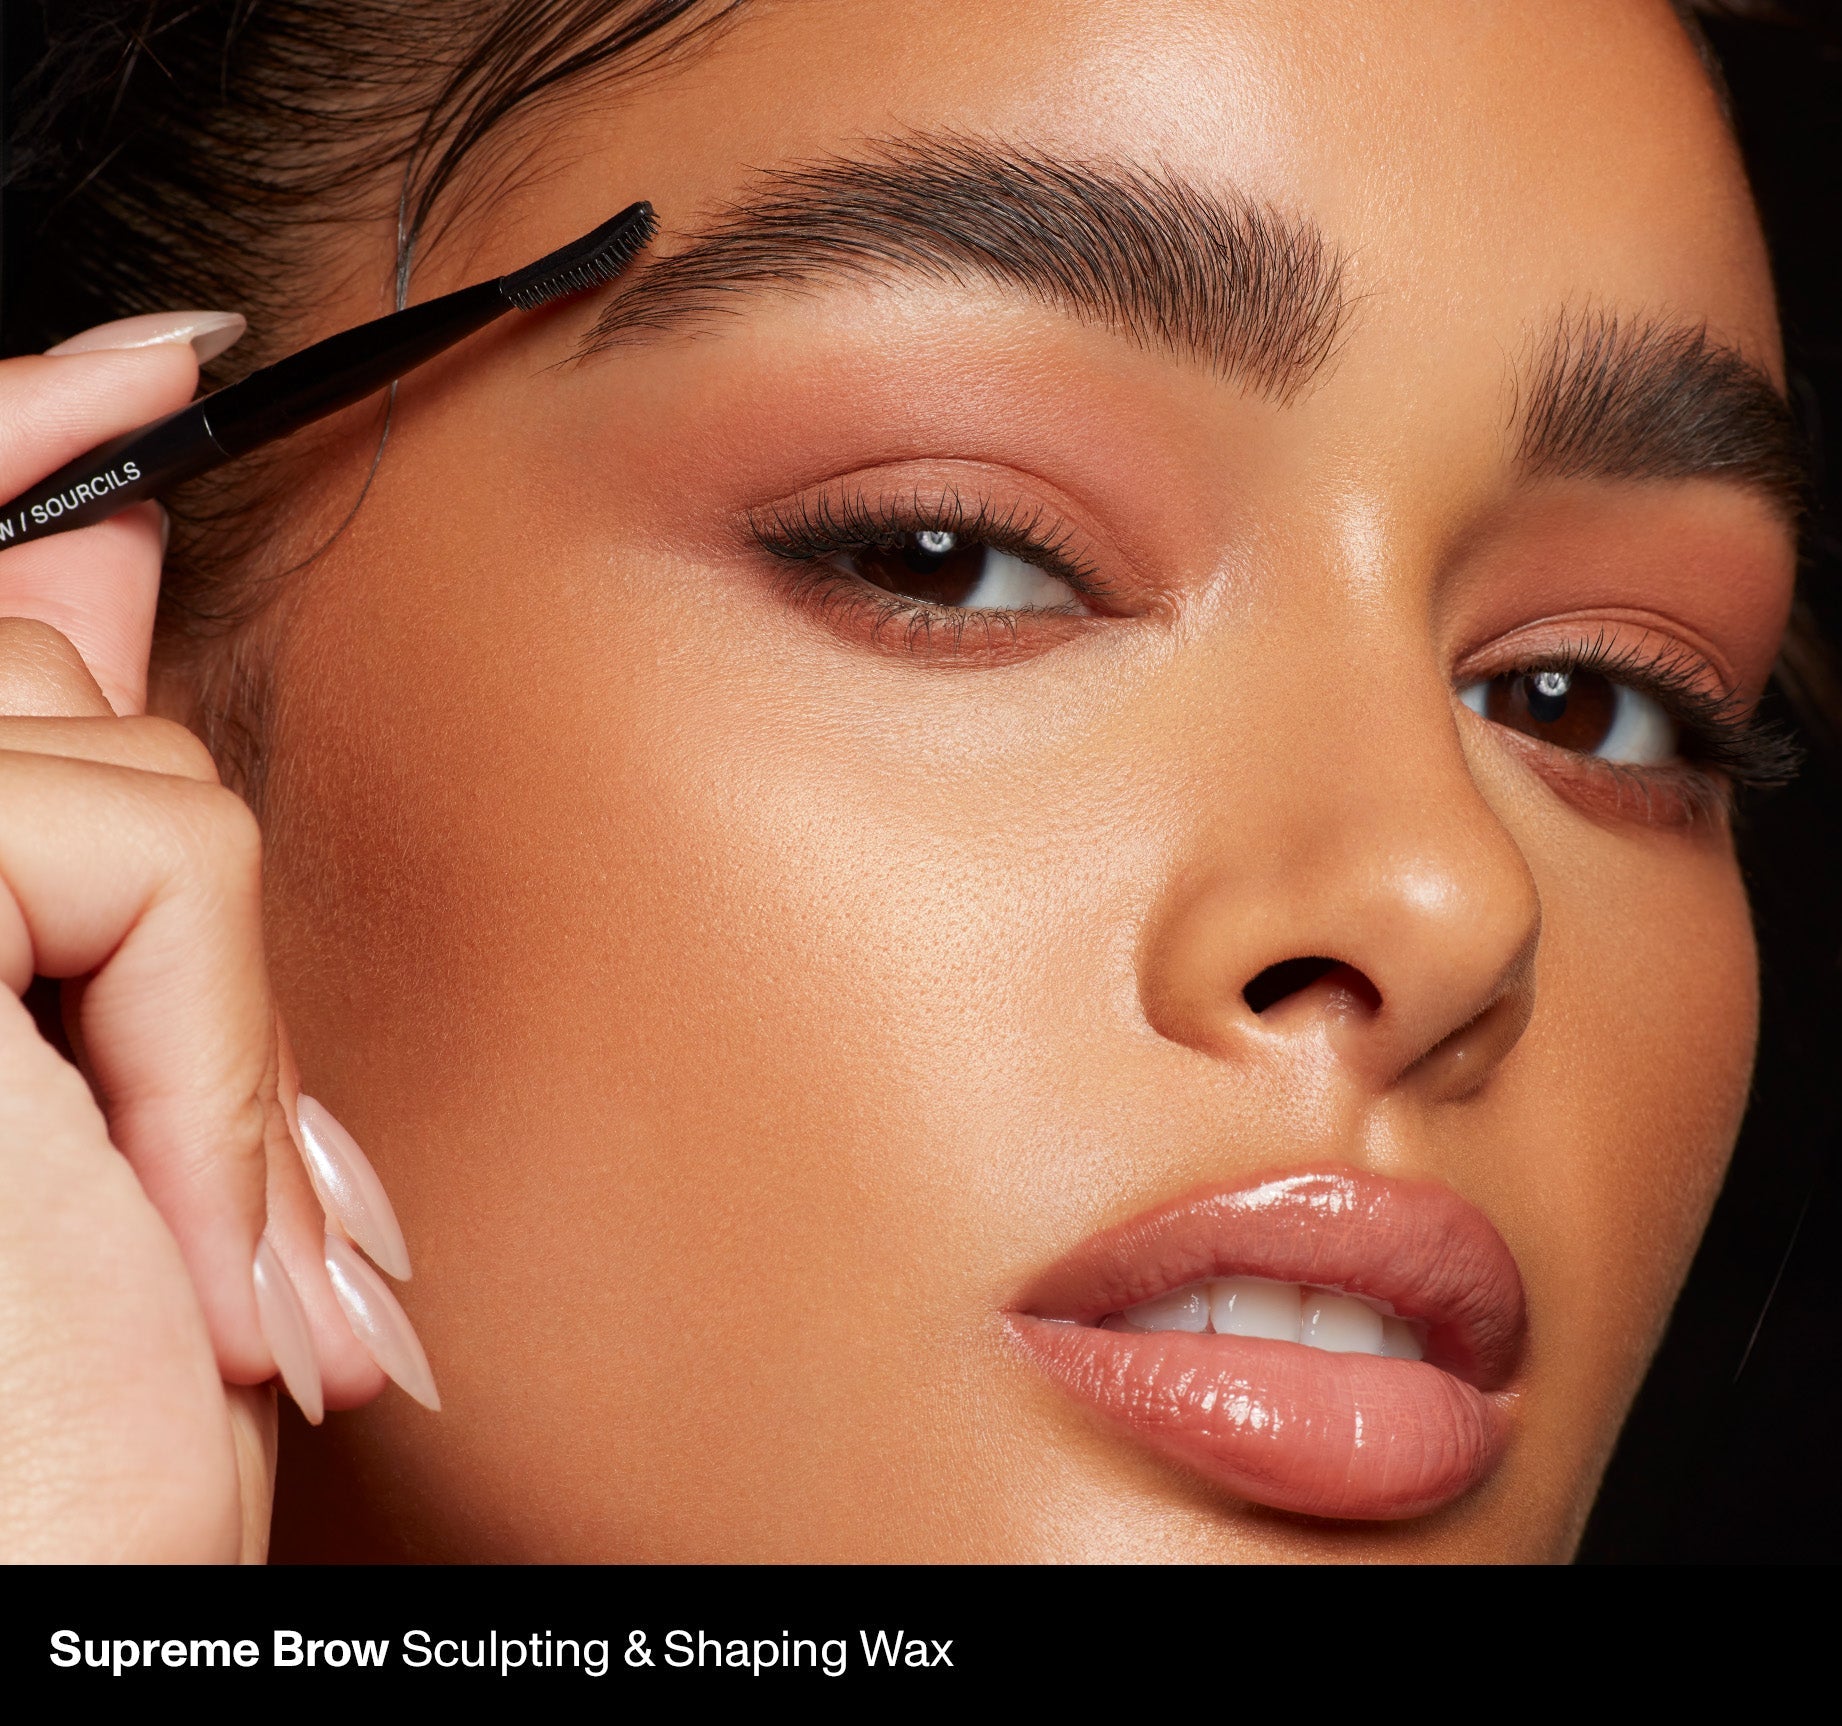 Supreme Brow Sculpting And Shaping Wax - Biscotti - Image 8